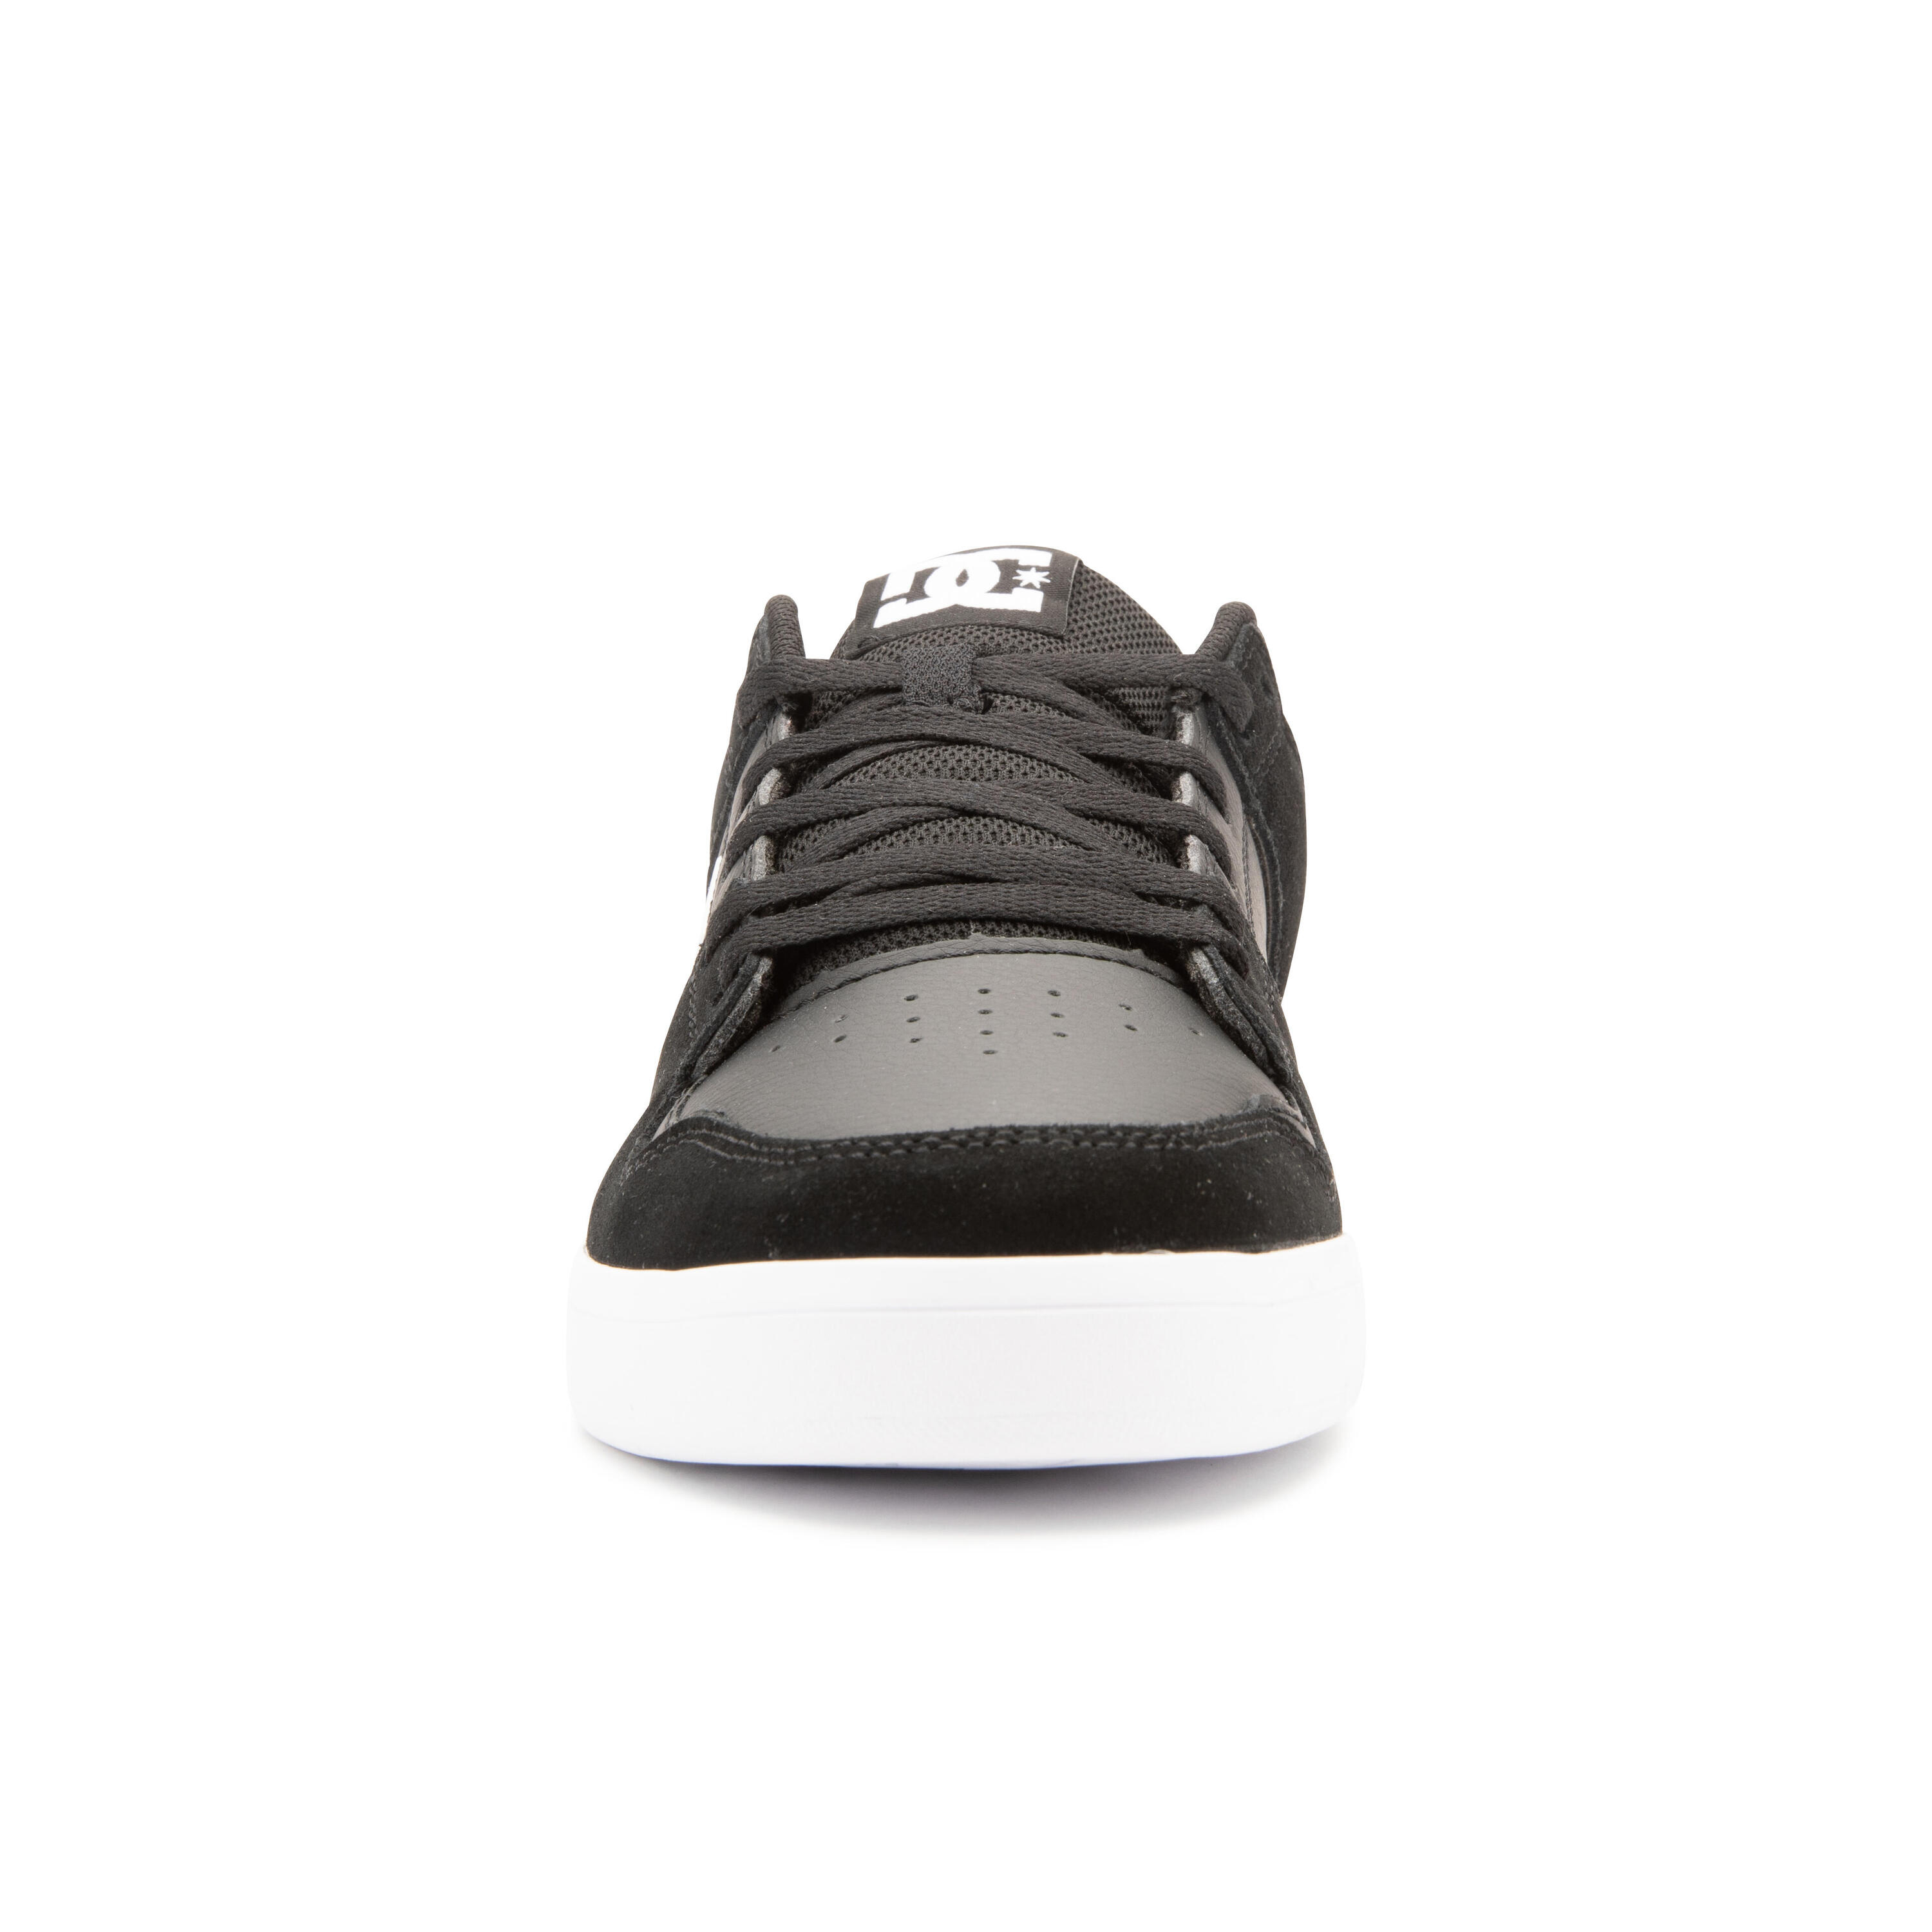 Adult Skate Shoes Cure - Black/White 4/11